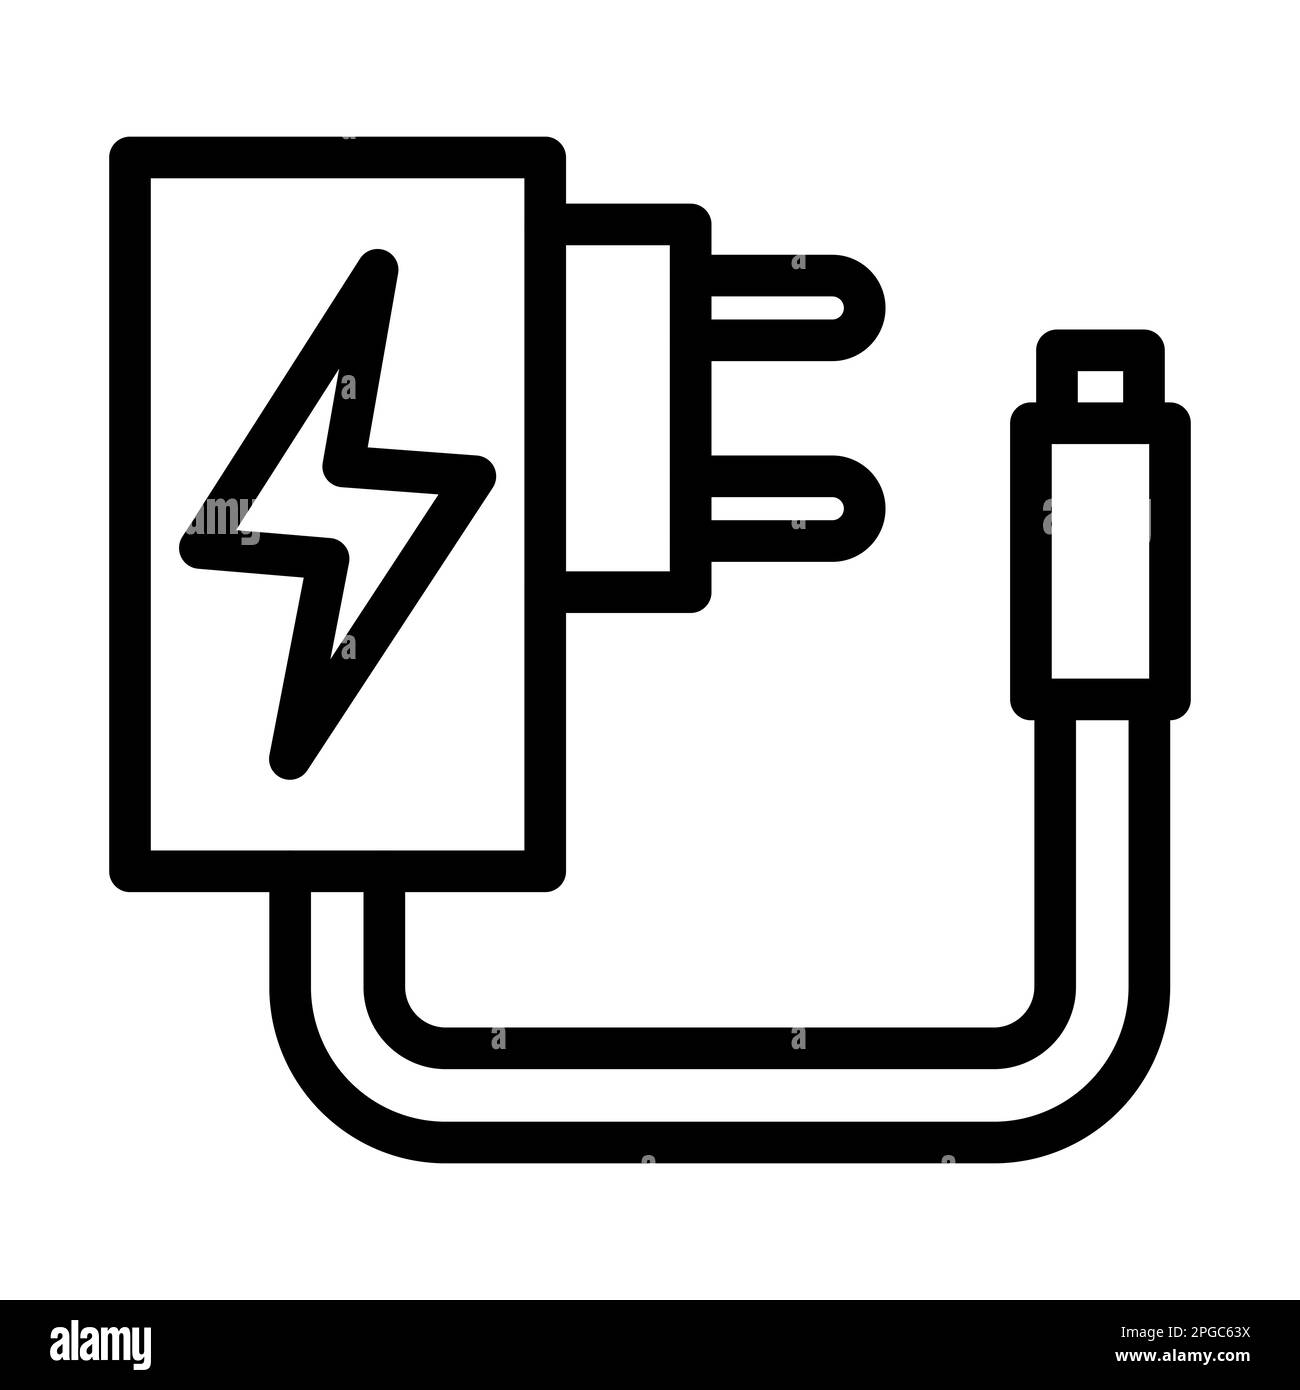 Charger Vector Thick Line Icon For Personal And Commercial Use. Stock Photo